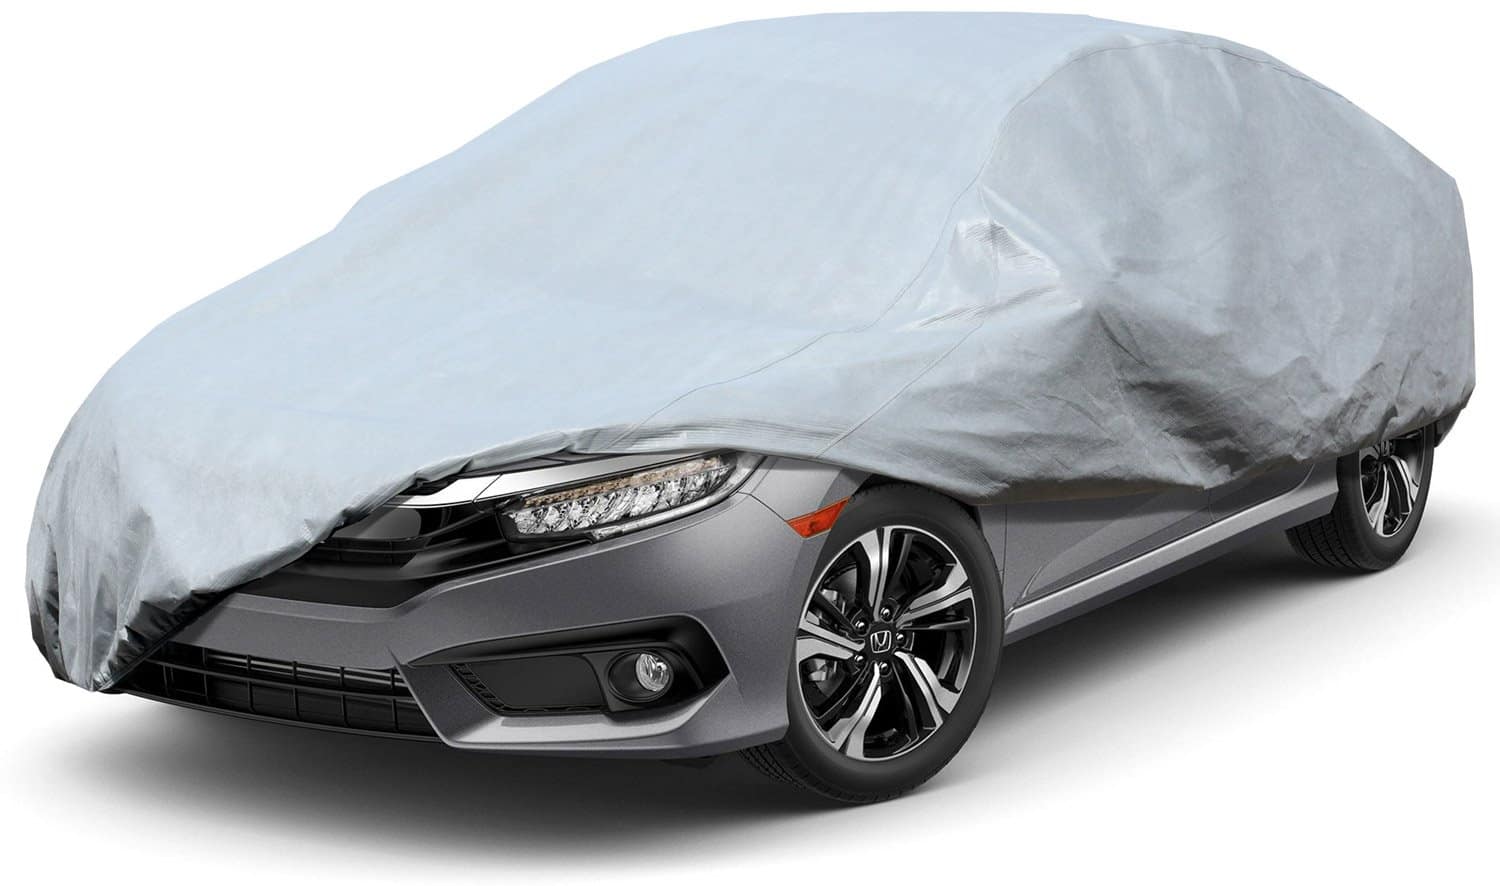 Have a Look At The Benefits Of Car Covers!